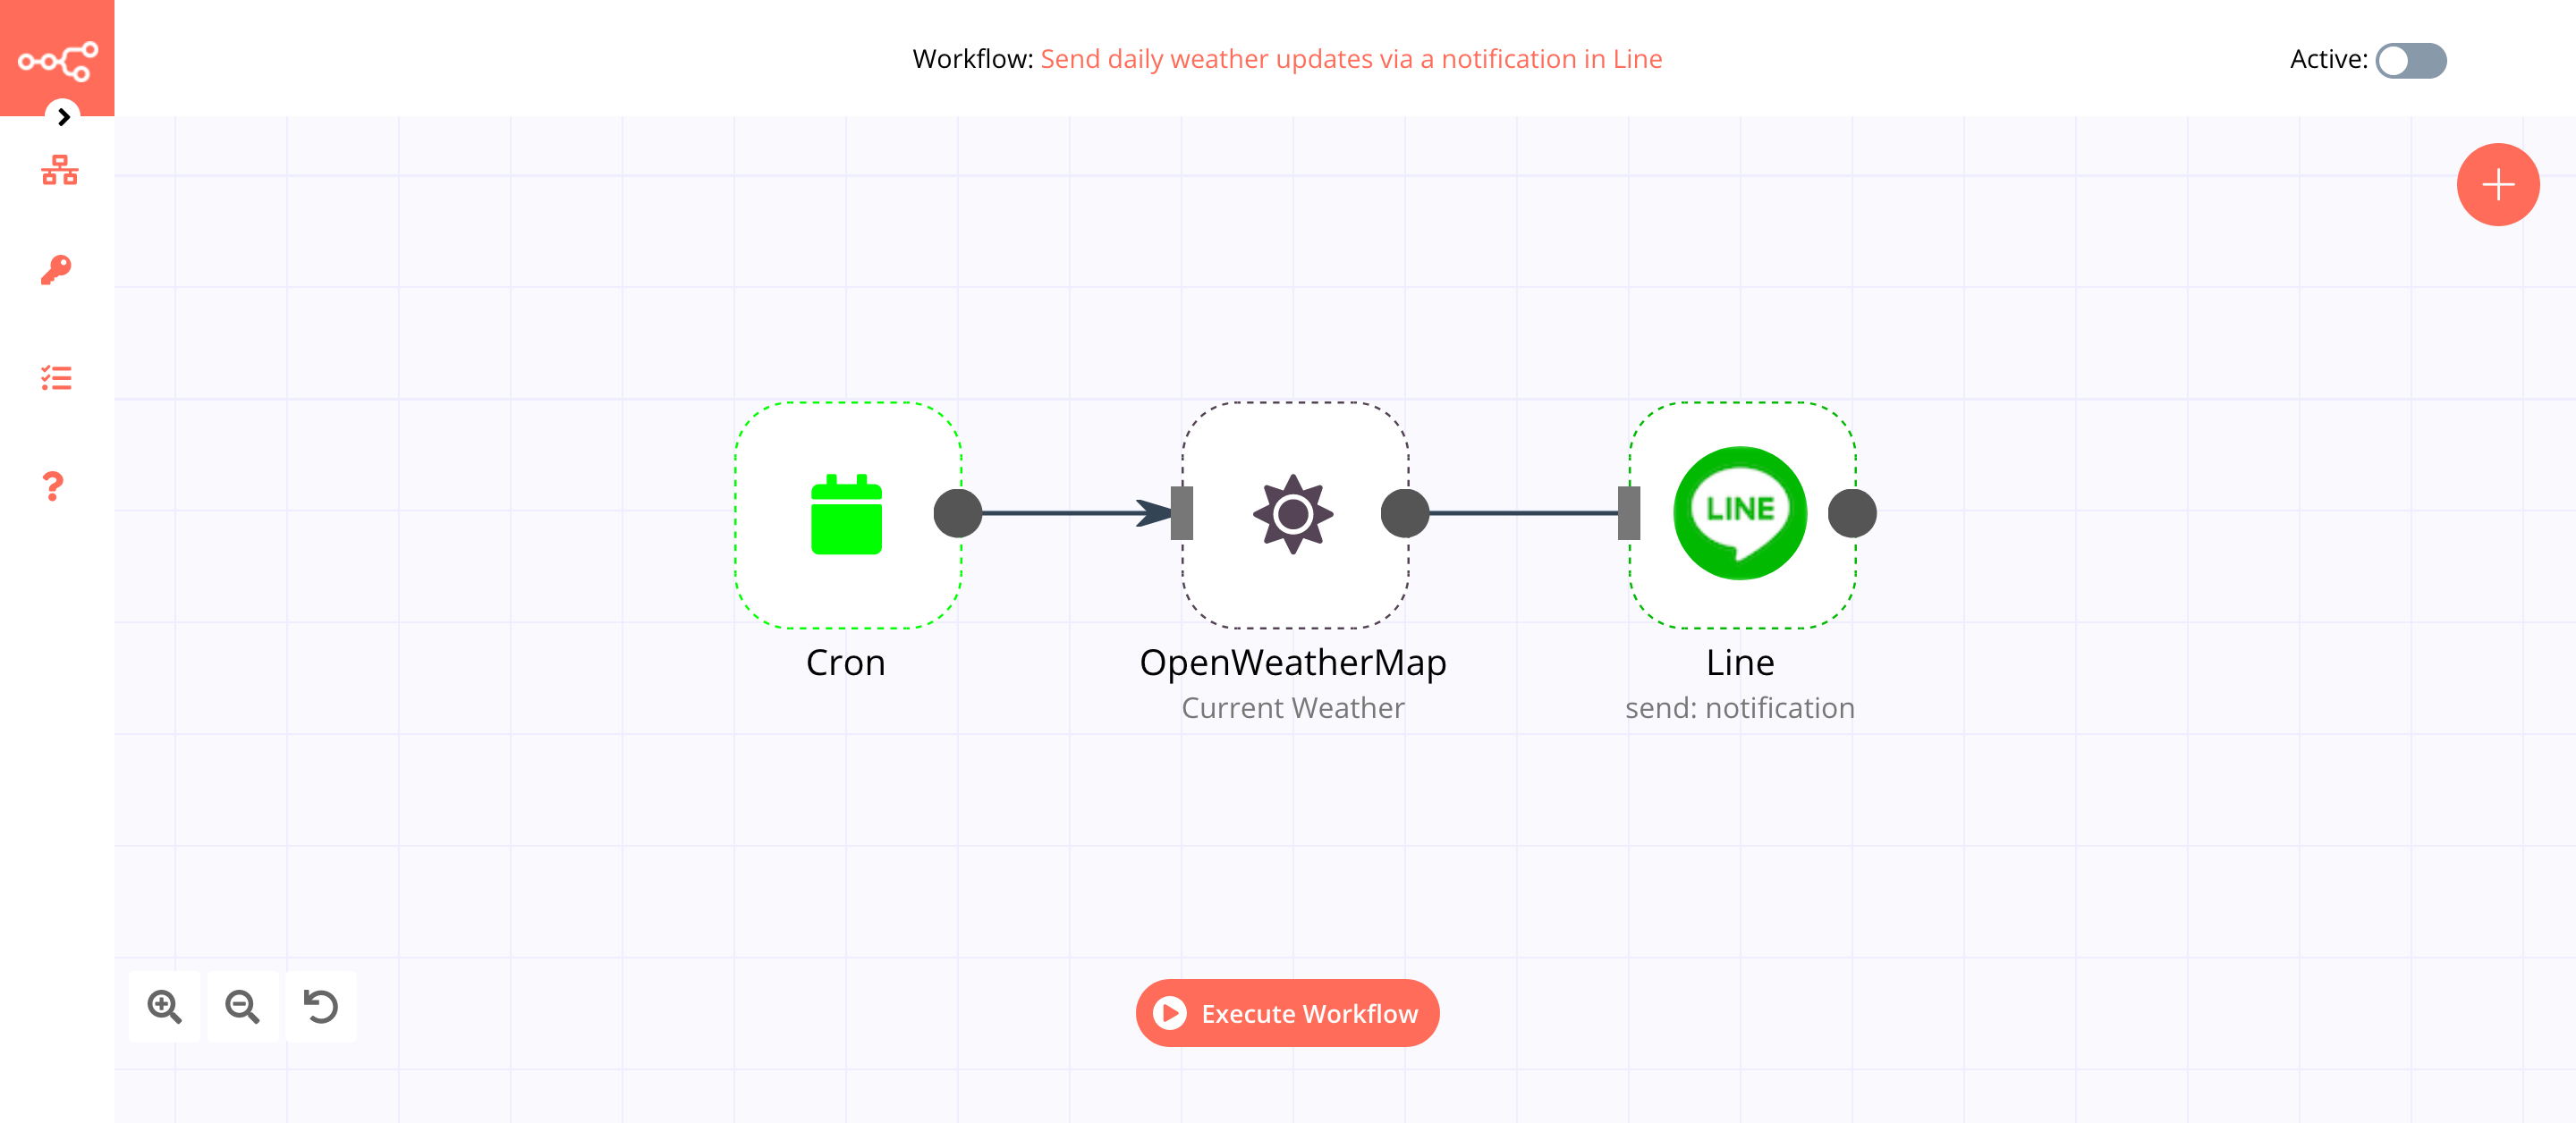 A workflow with the Line node